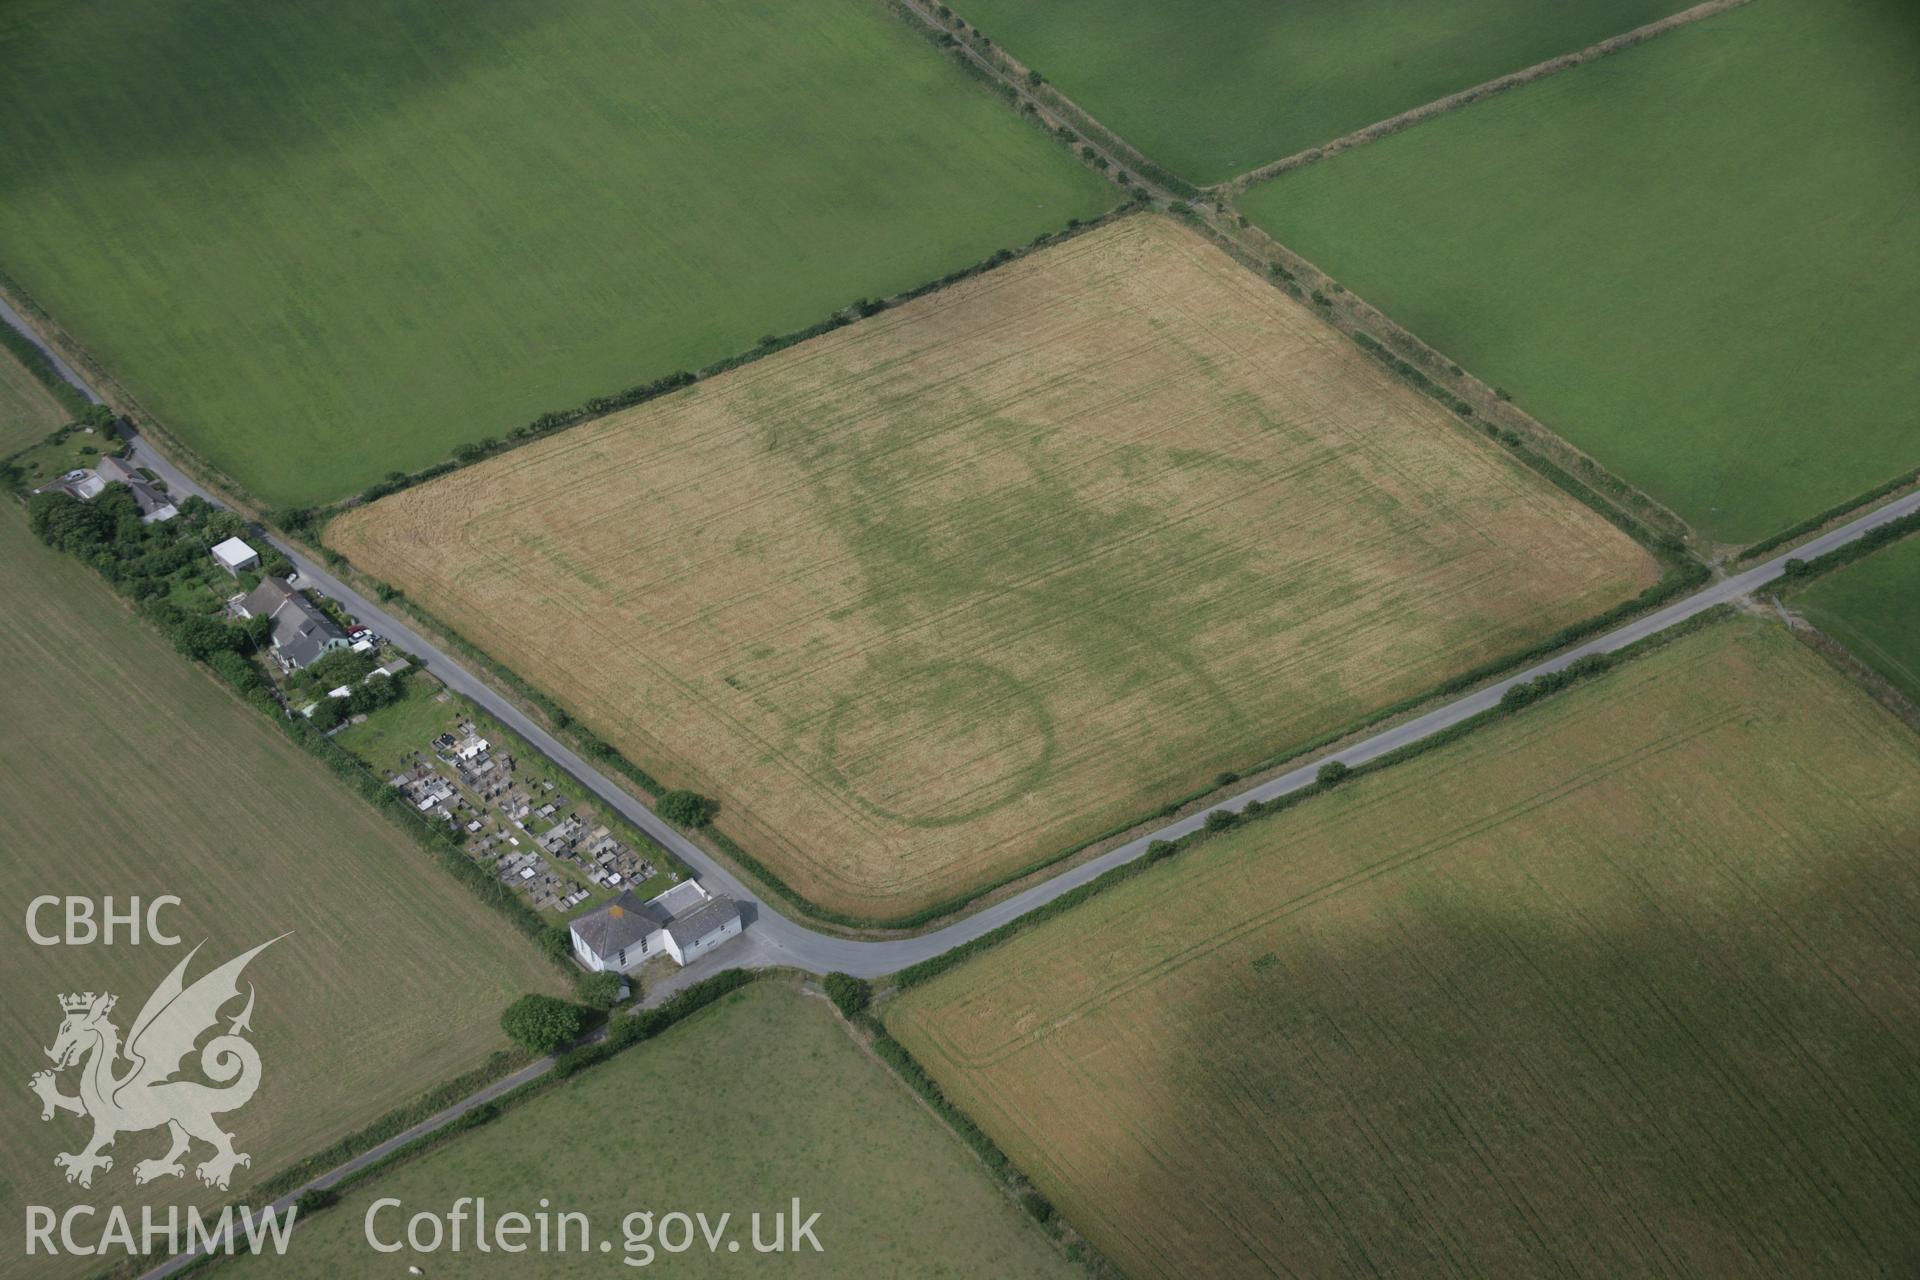 RCAHMW digital colour oblique photograph of a cropmark enclosure east of Treferedd Uchaf viewed from the east. Taken on 27/07/2005 by T.G. Driver.